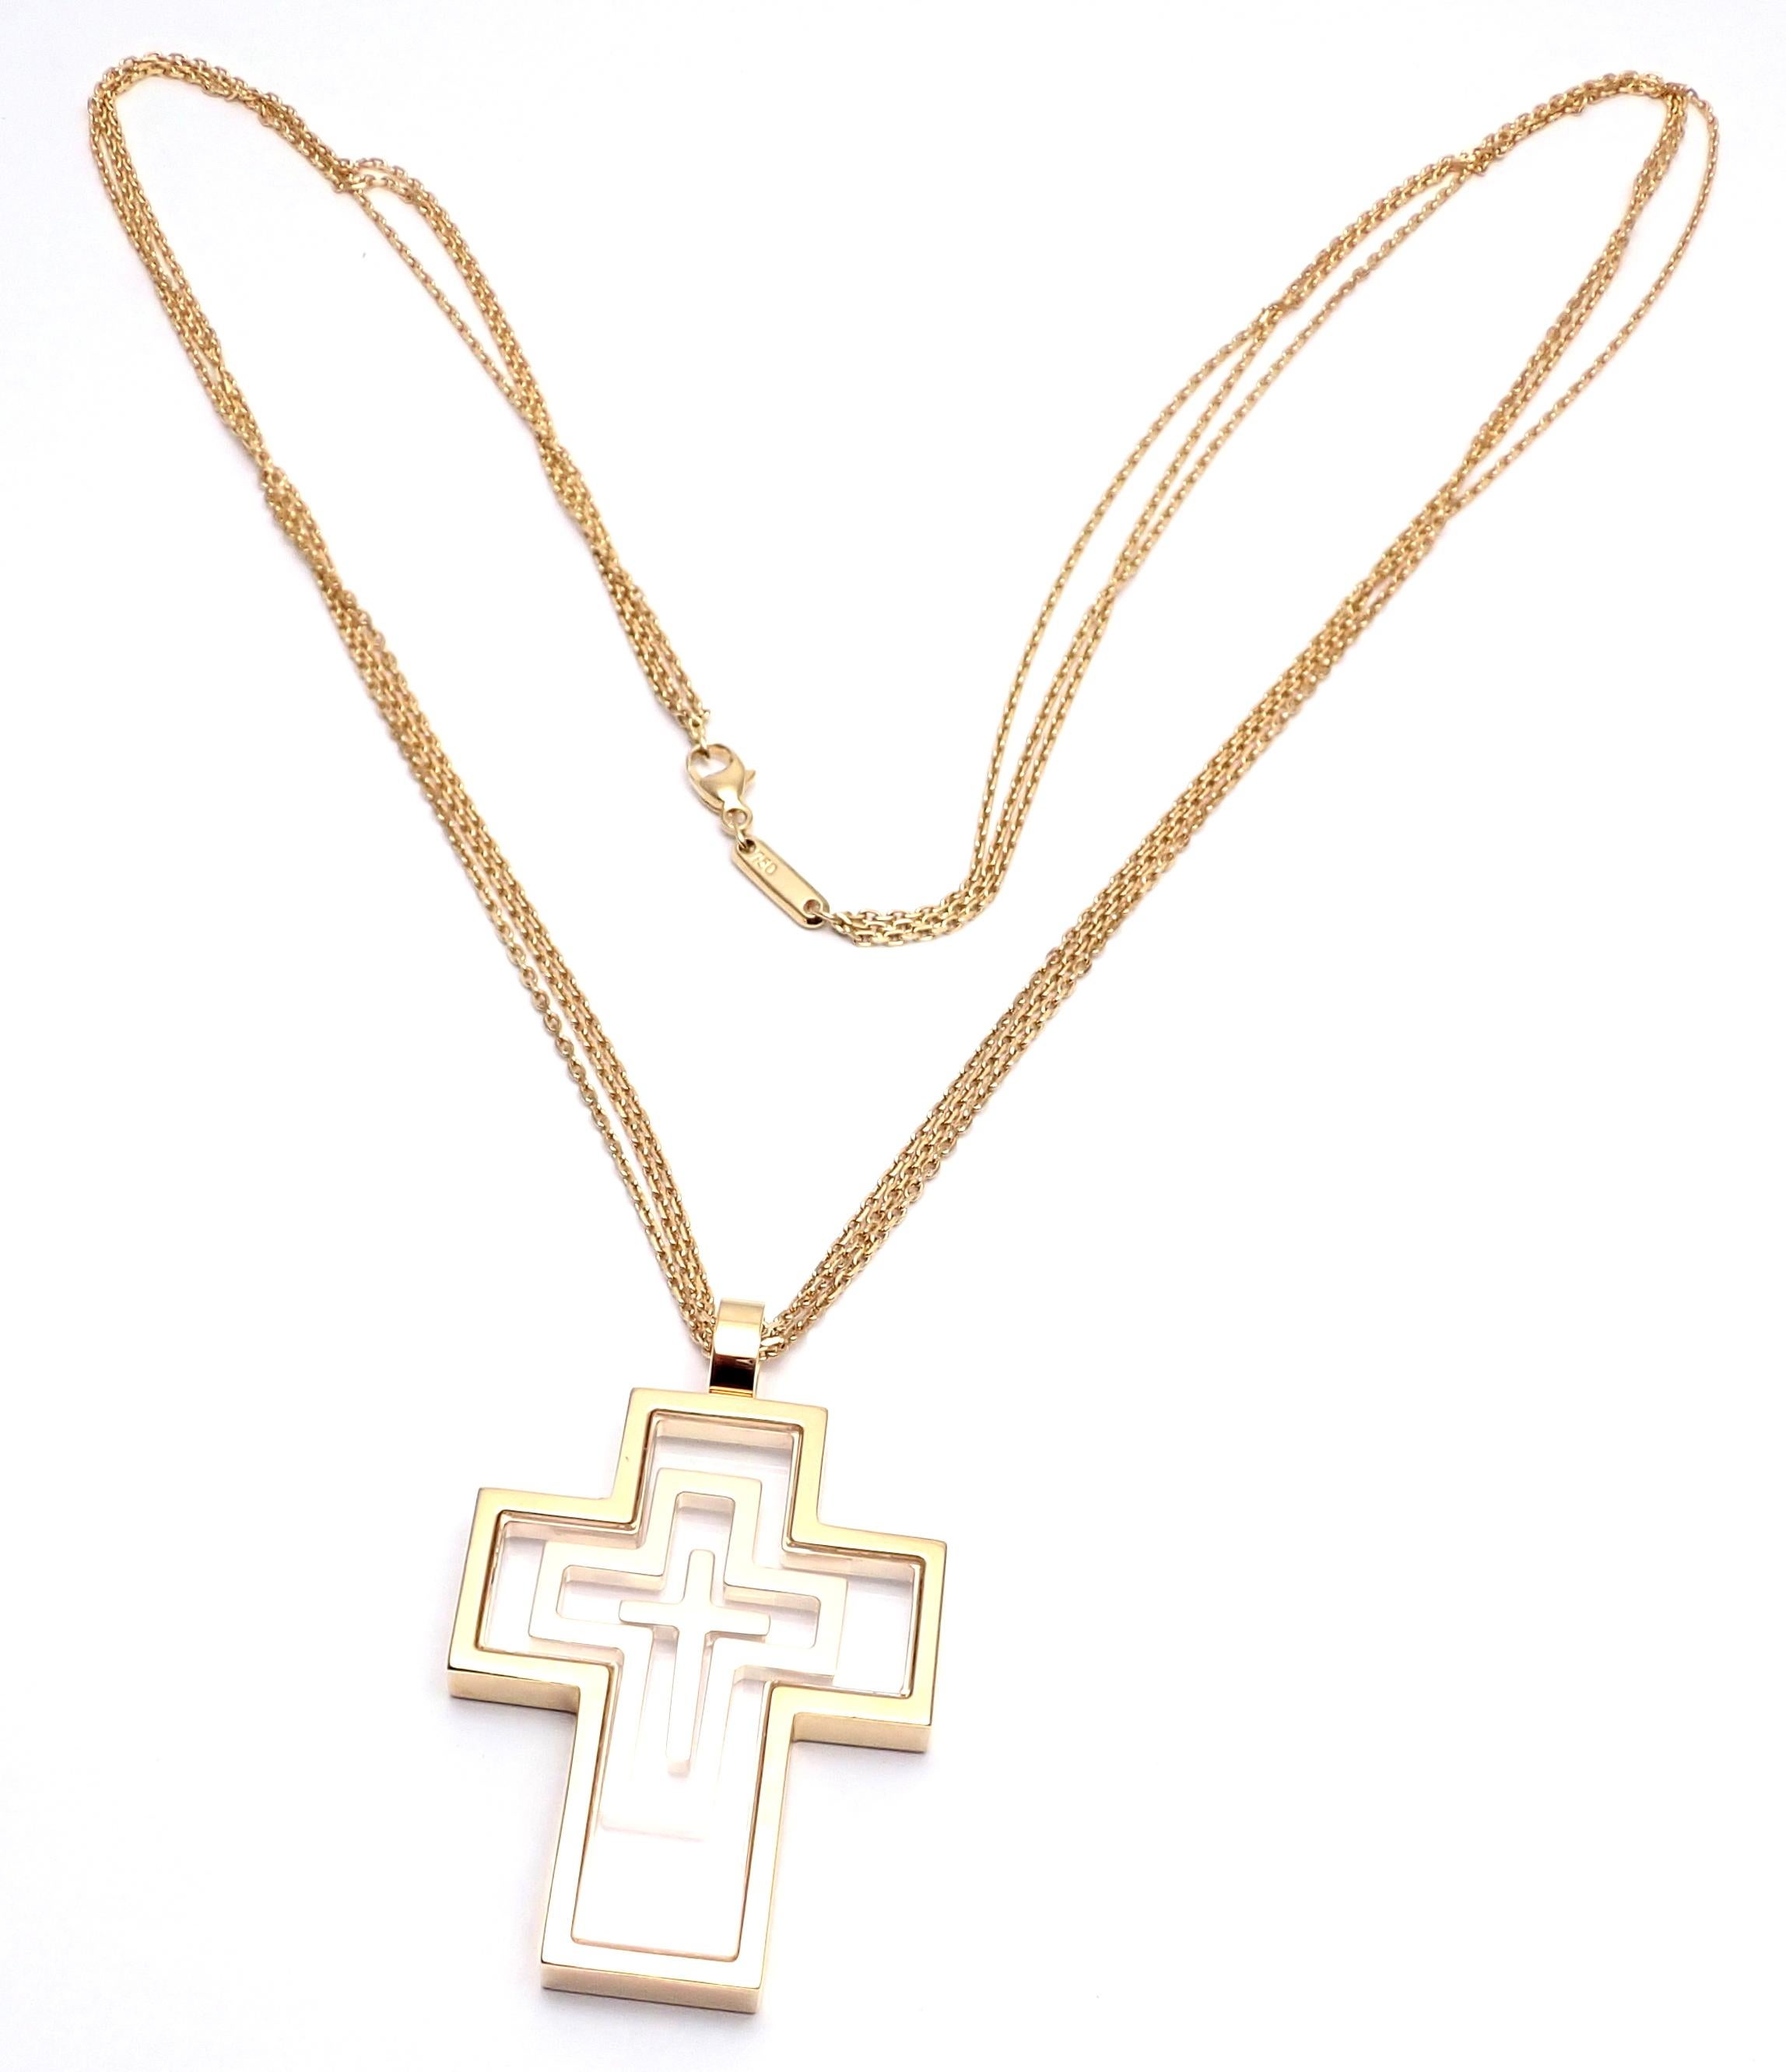 18k Yellow Gold Extra Large Cross Pendant Necklace by Chopard. 
Details: 
Length: Chain Length: 24